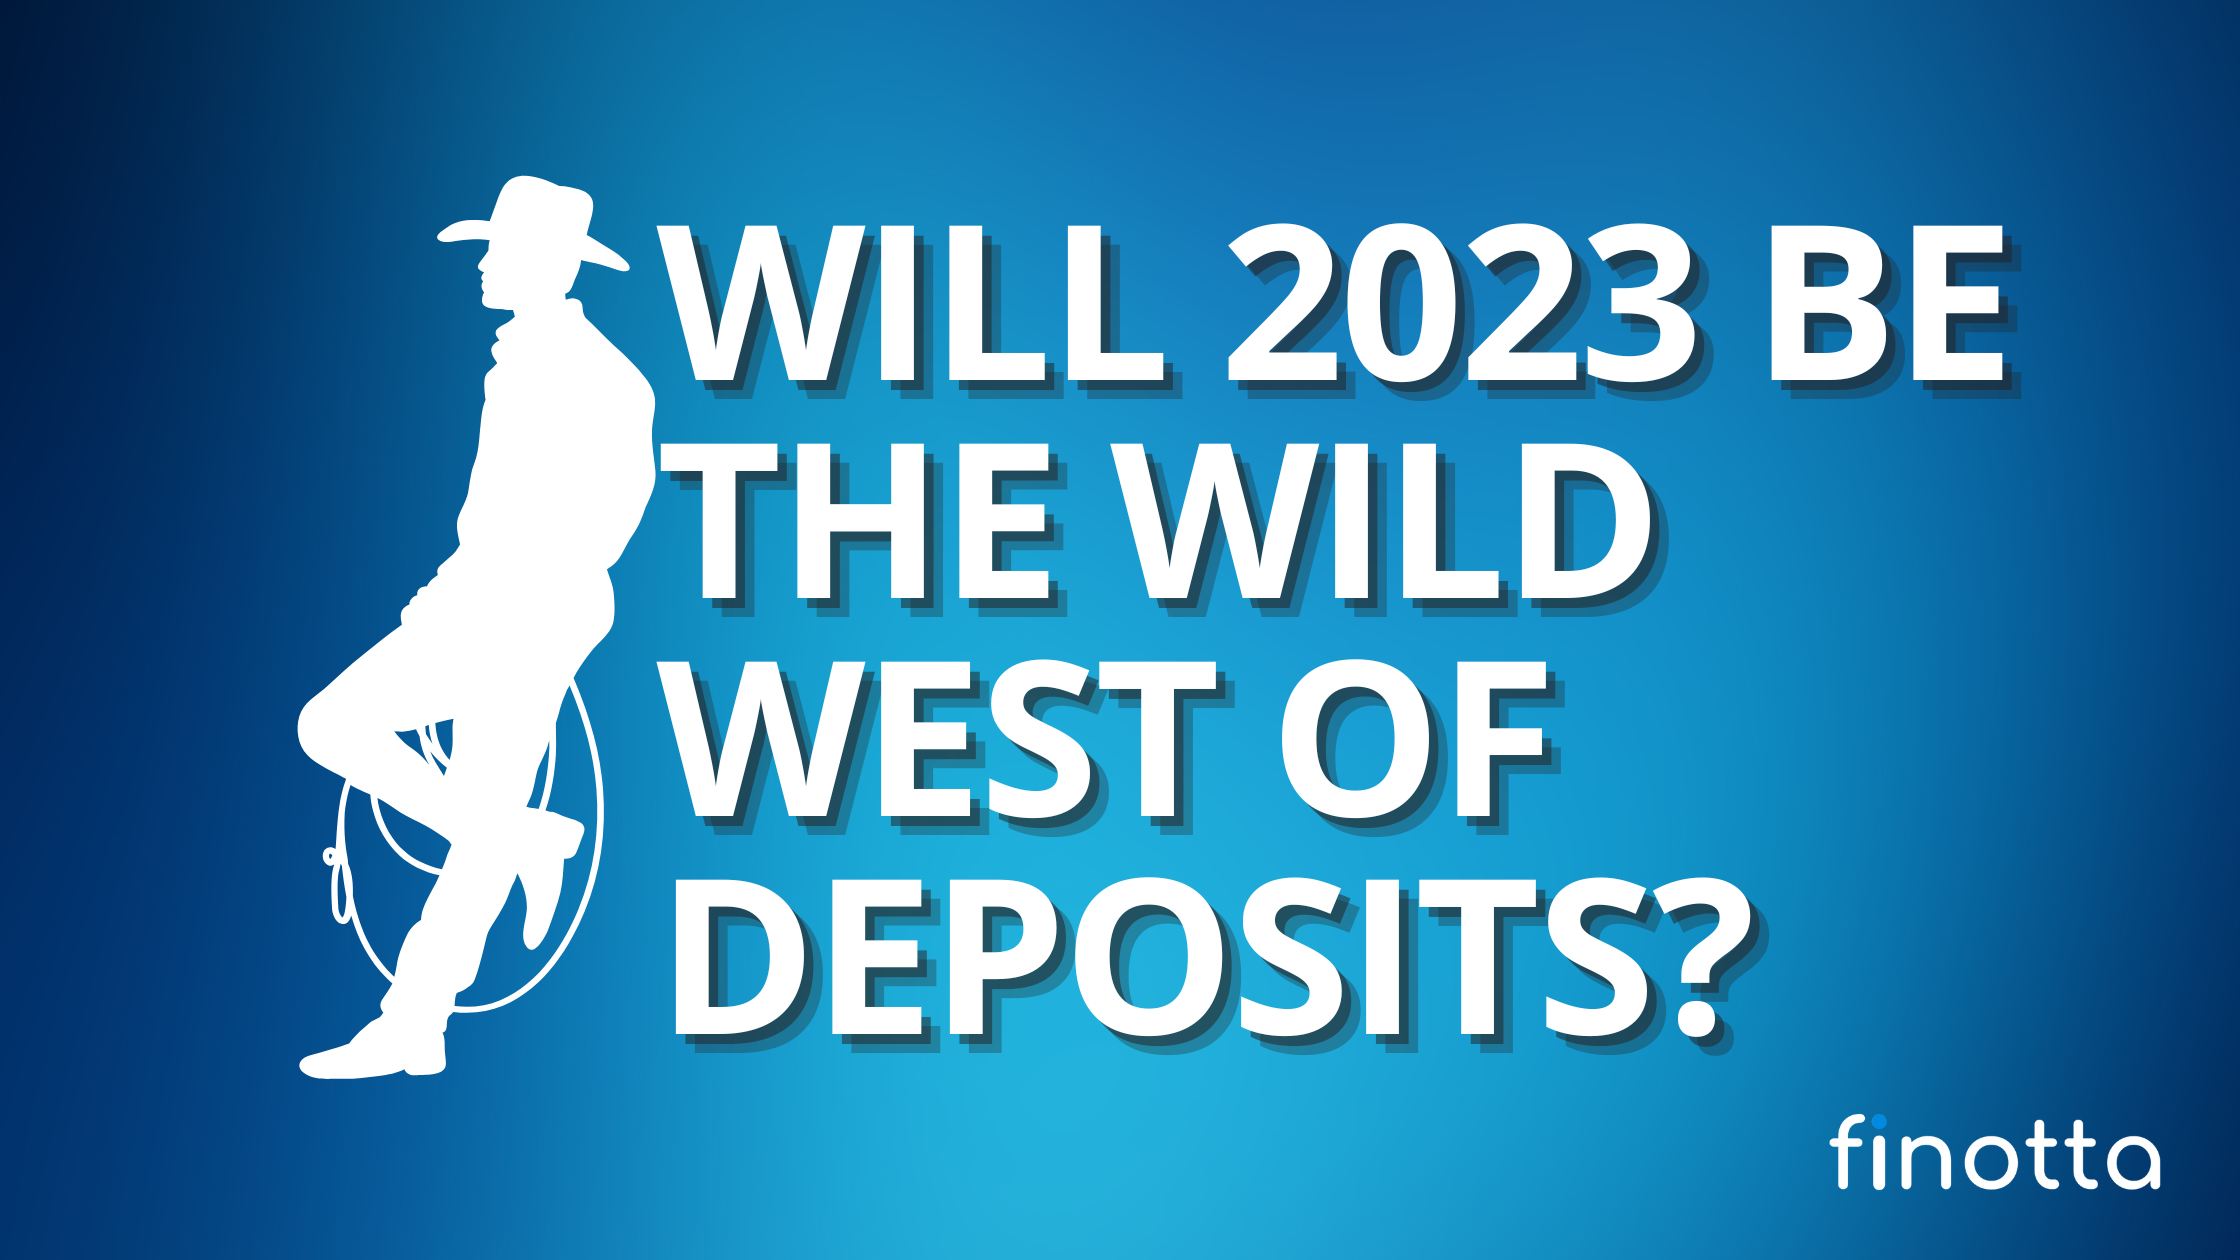 Will 2023 Be The Wild Wild West of Deposits?